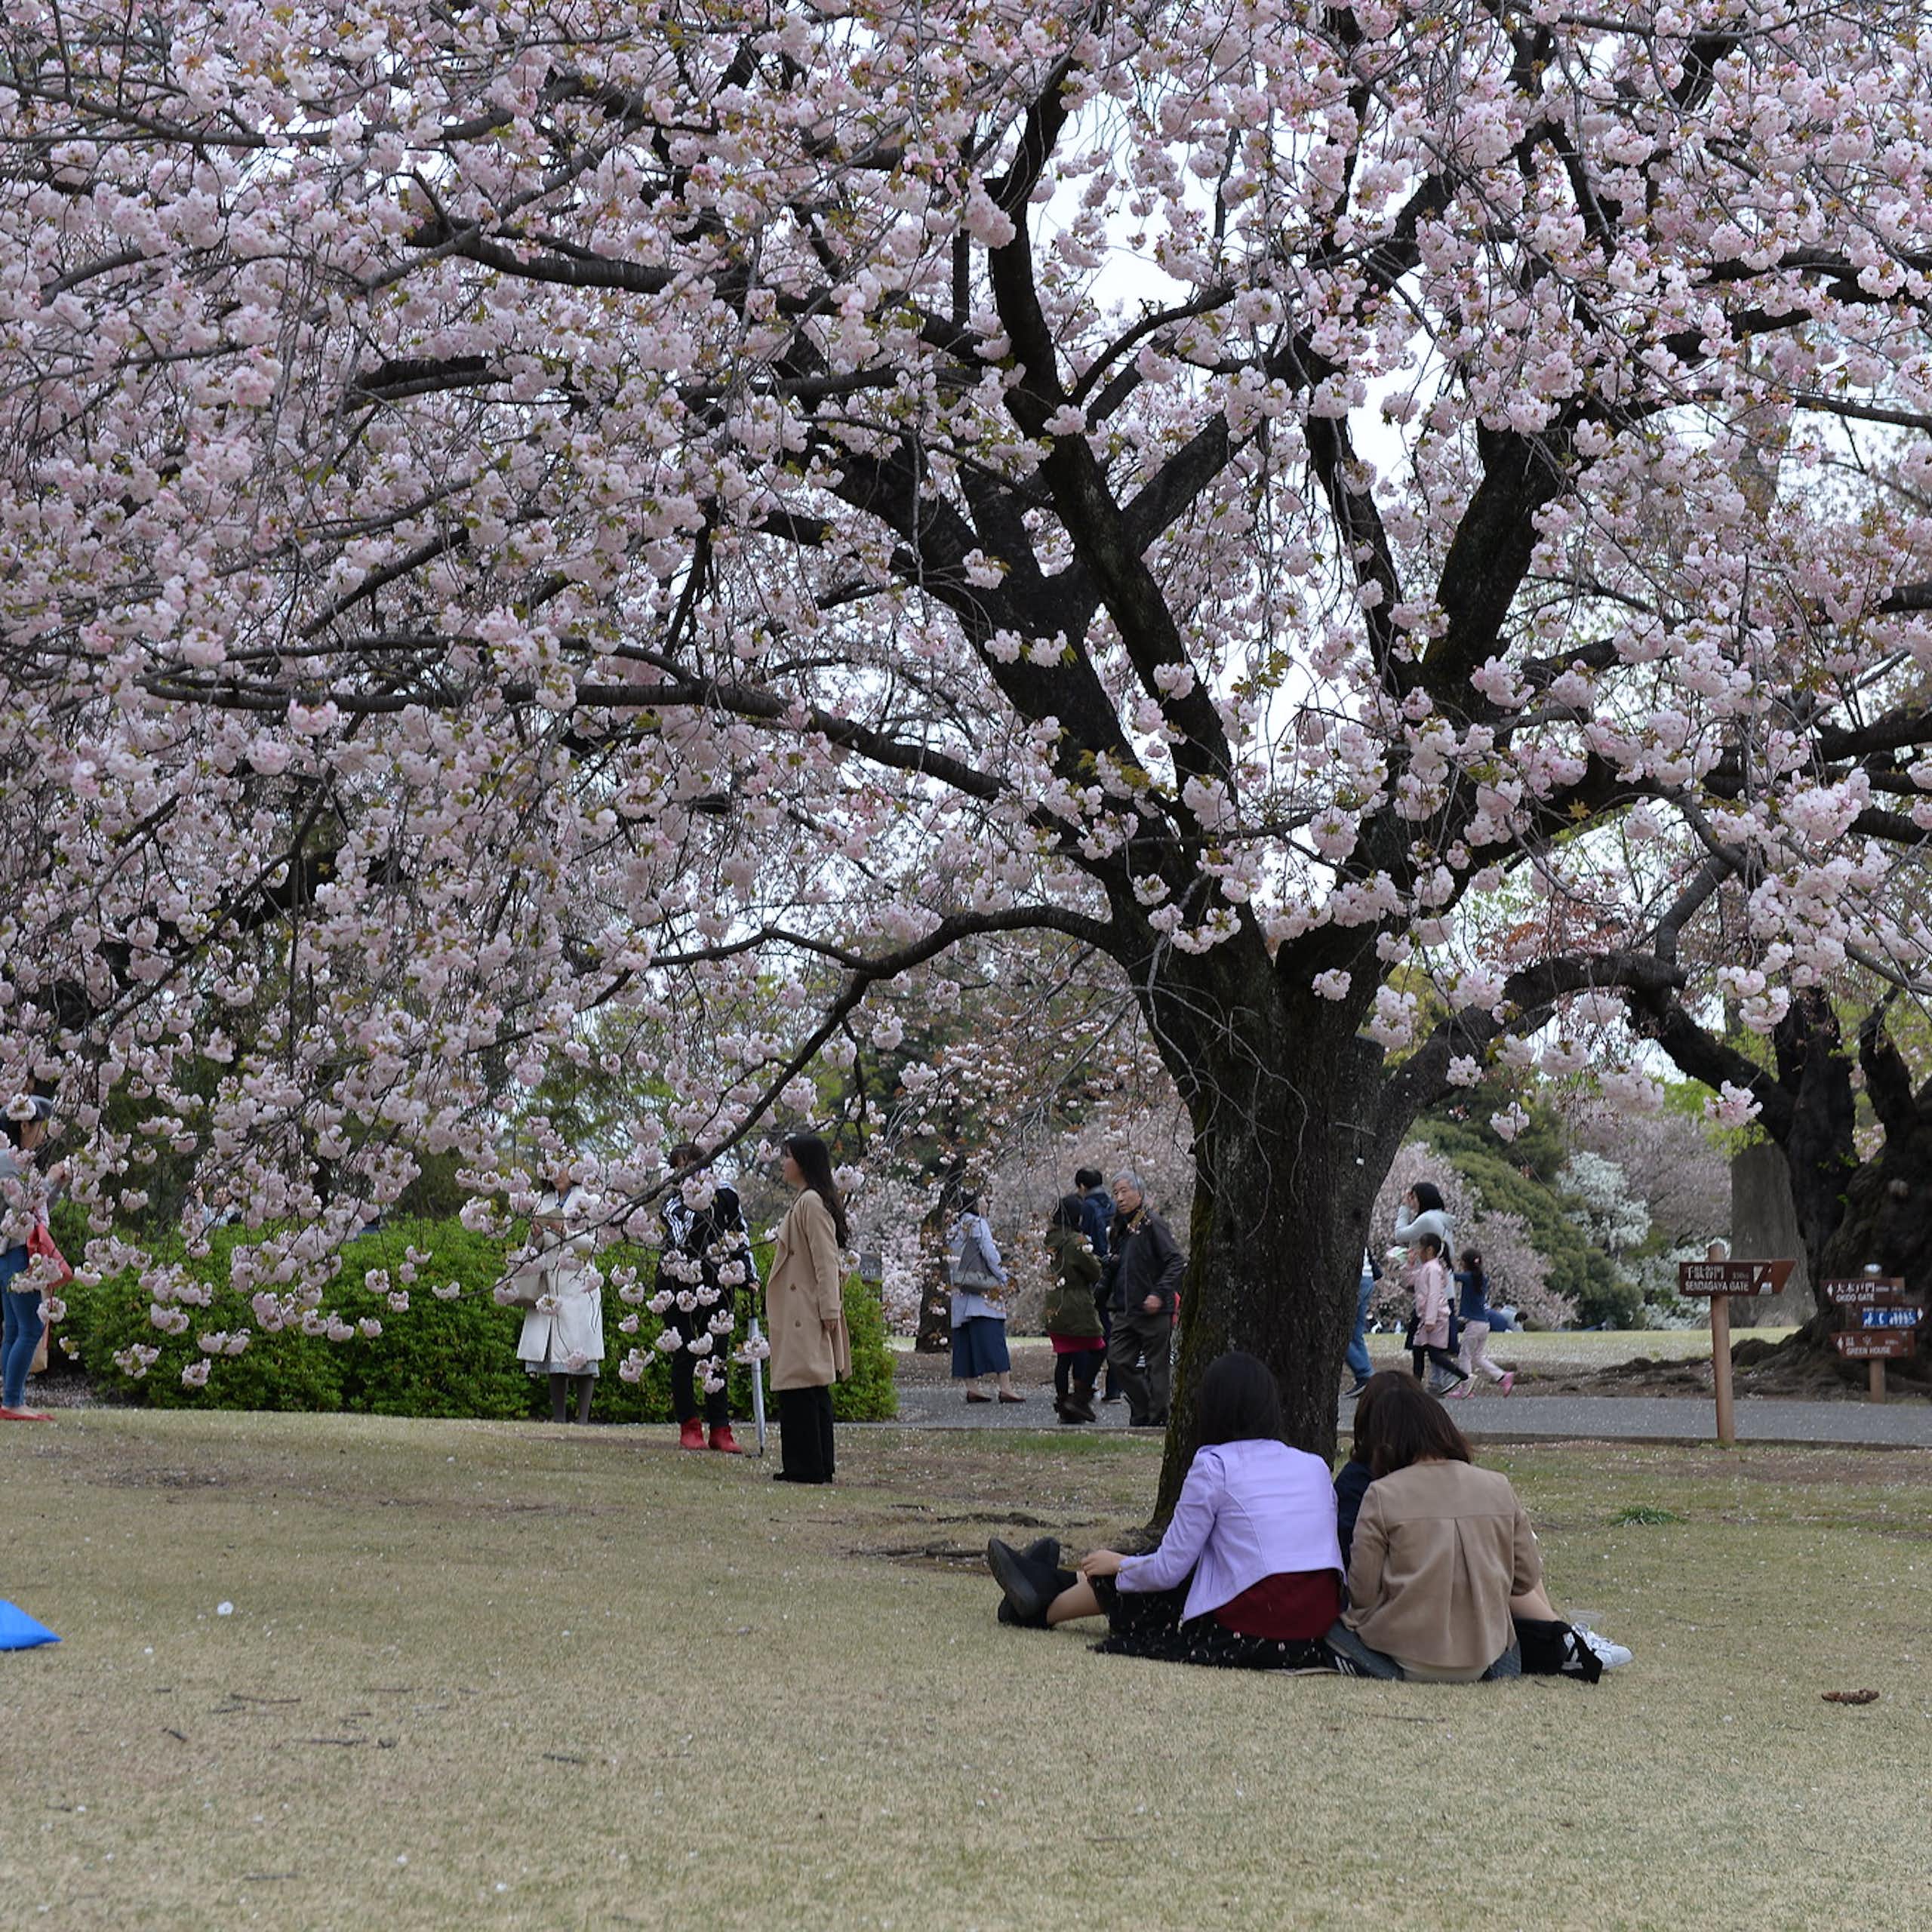 Families sit or walk around large trees with pink blooms in a garden.